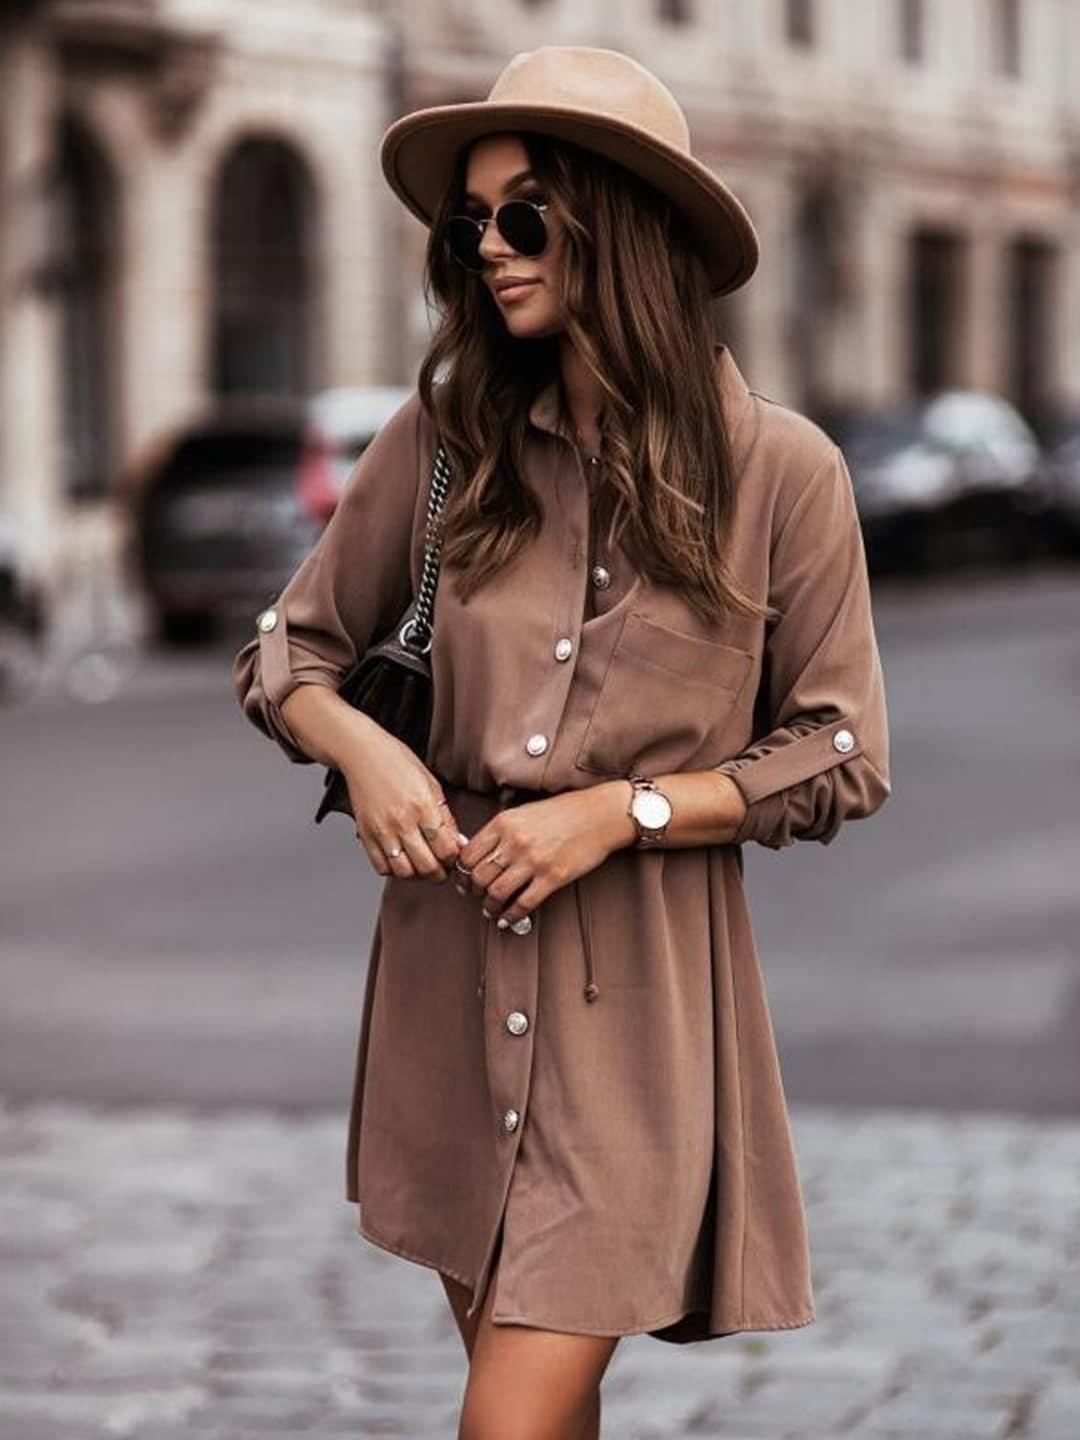 stylecast-brown-roll-up-sleeves-shirt-dress